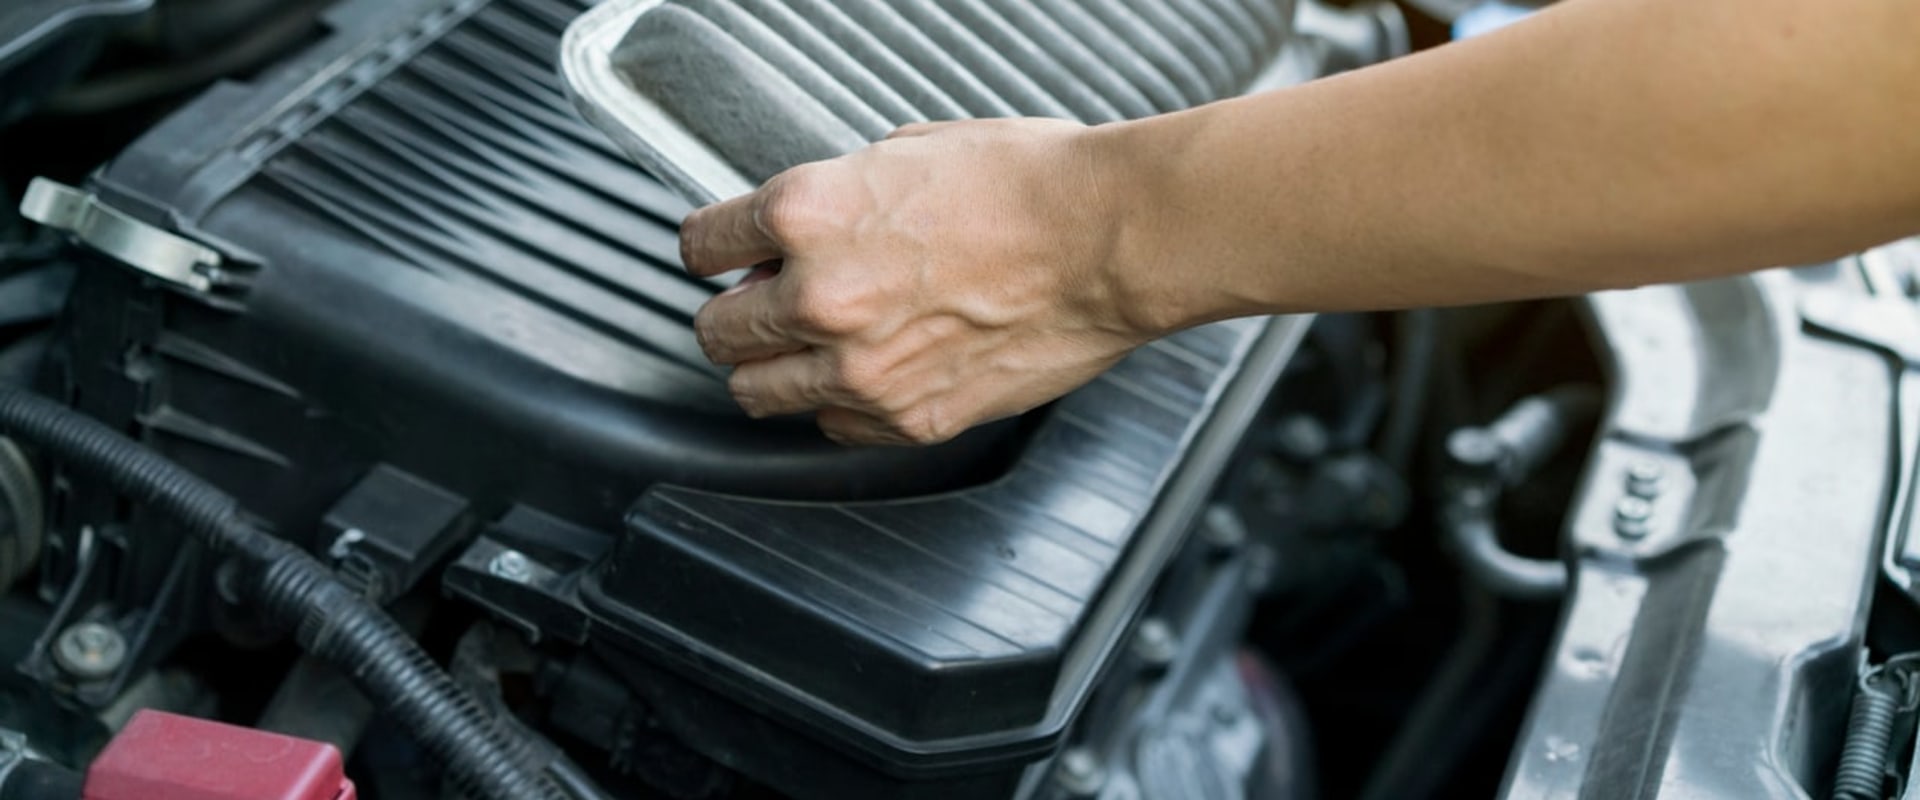 The Consequences of Using the Wrong Size Car Air Filter